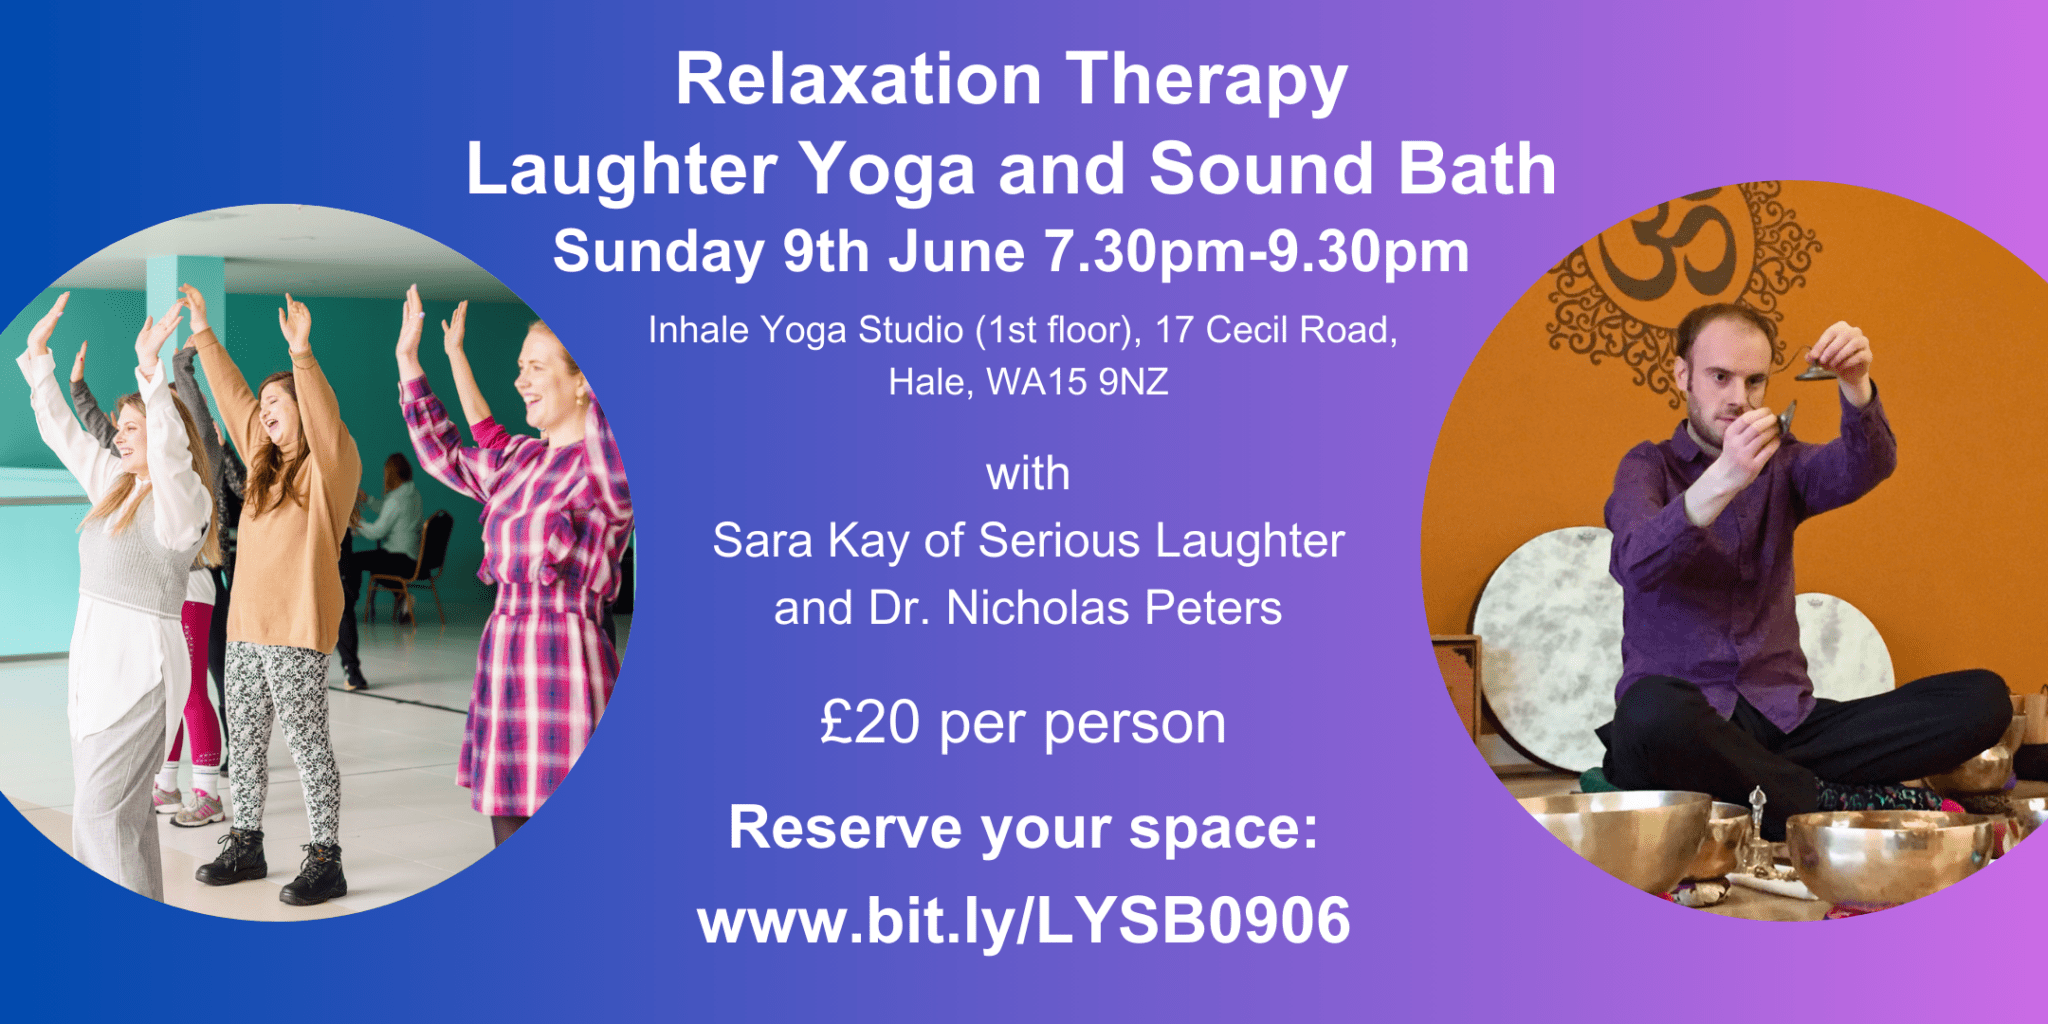 Laughter Yoga and Sound Bath